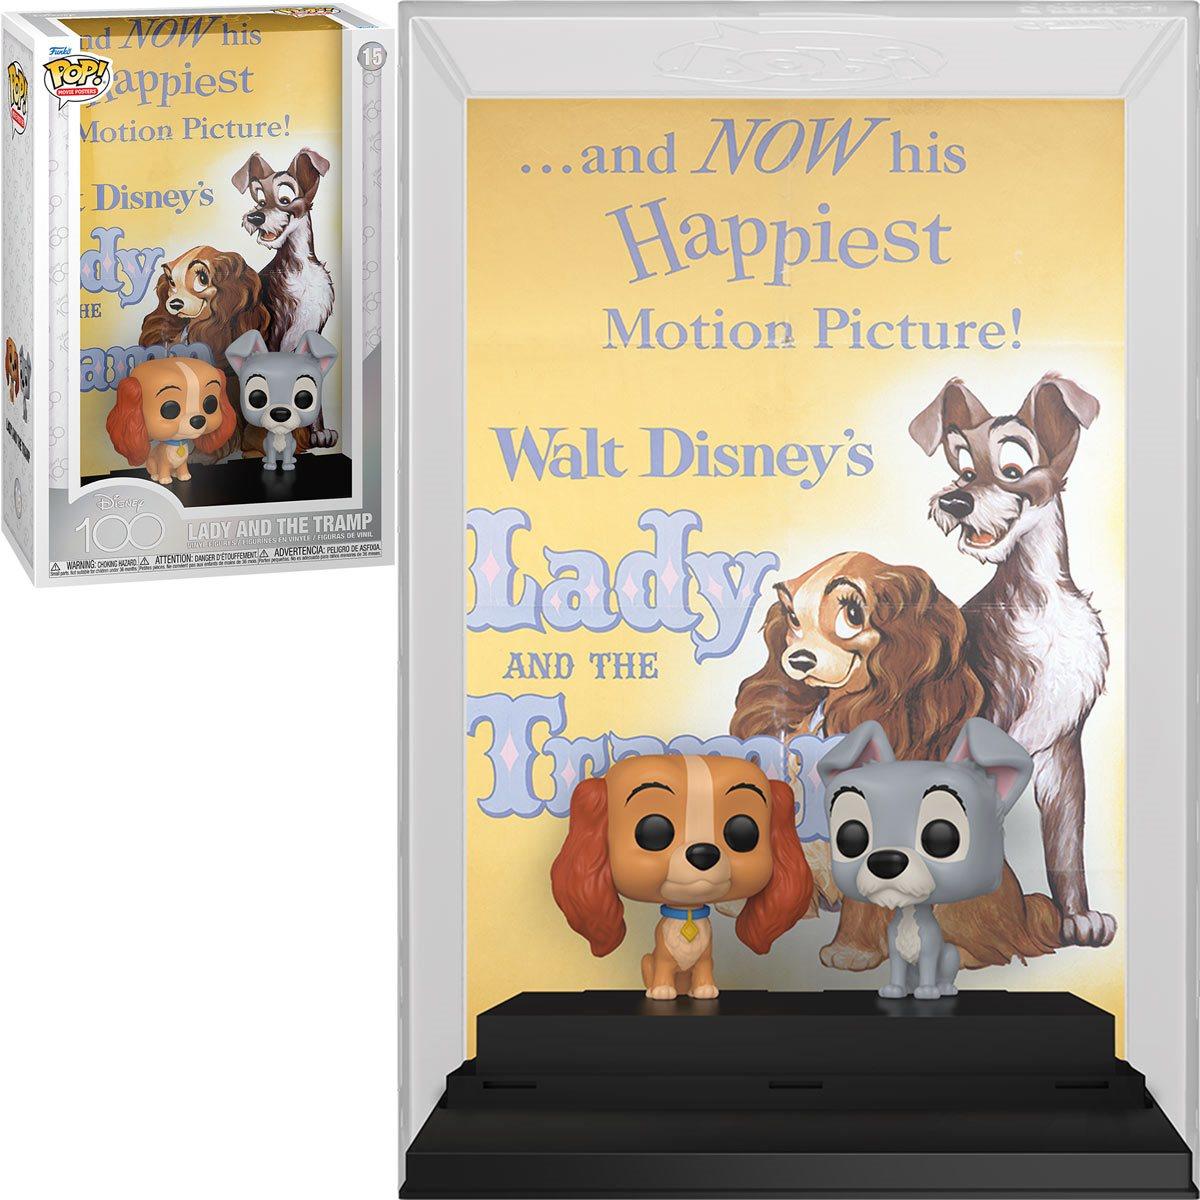 lady-and-the-tramp-funko-movie-poster.jpg